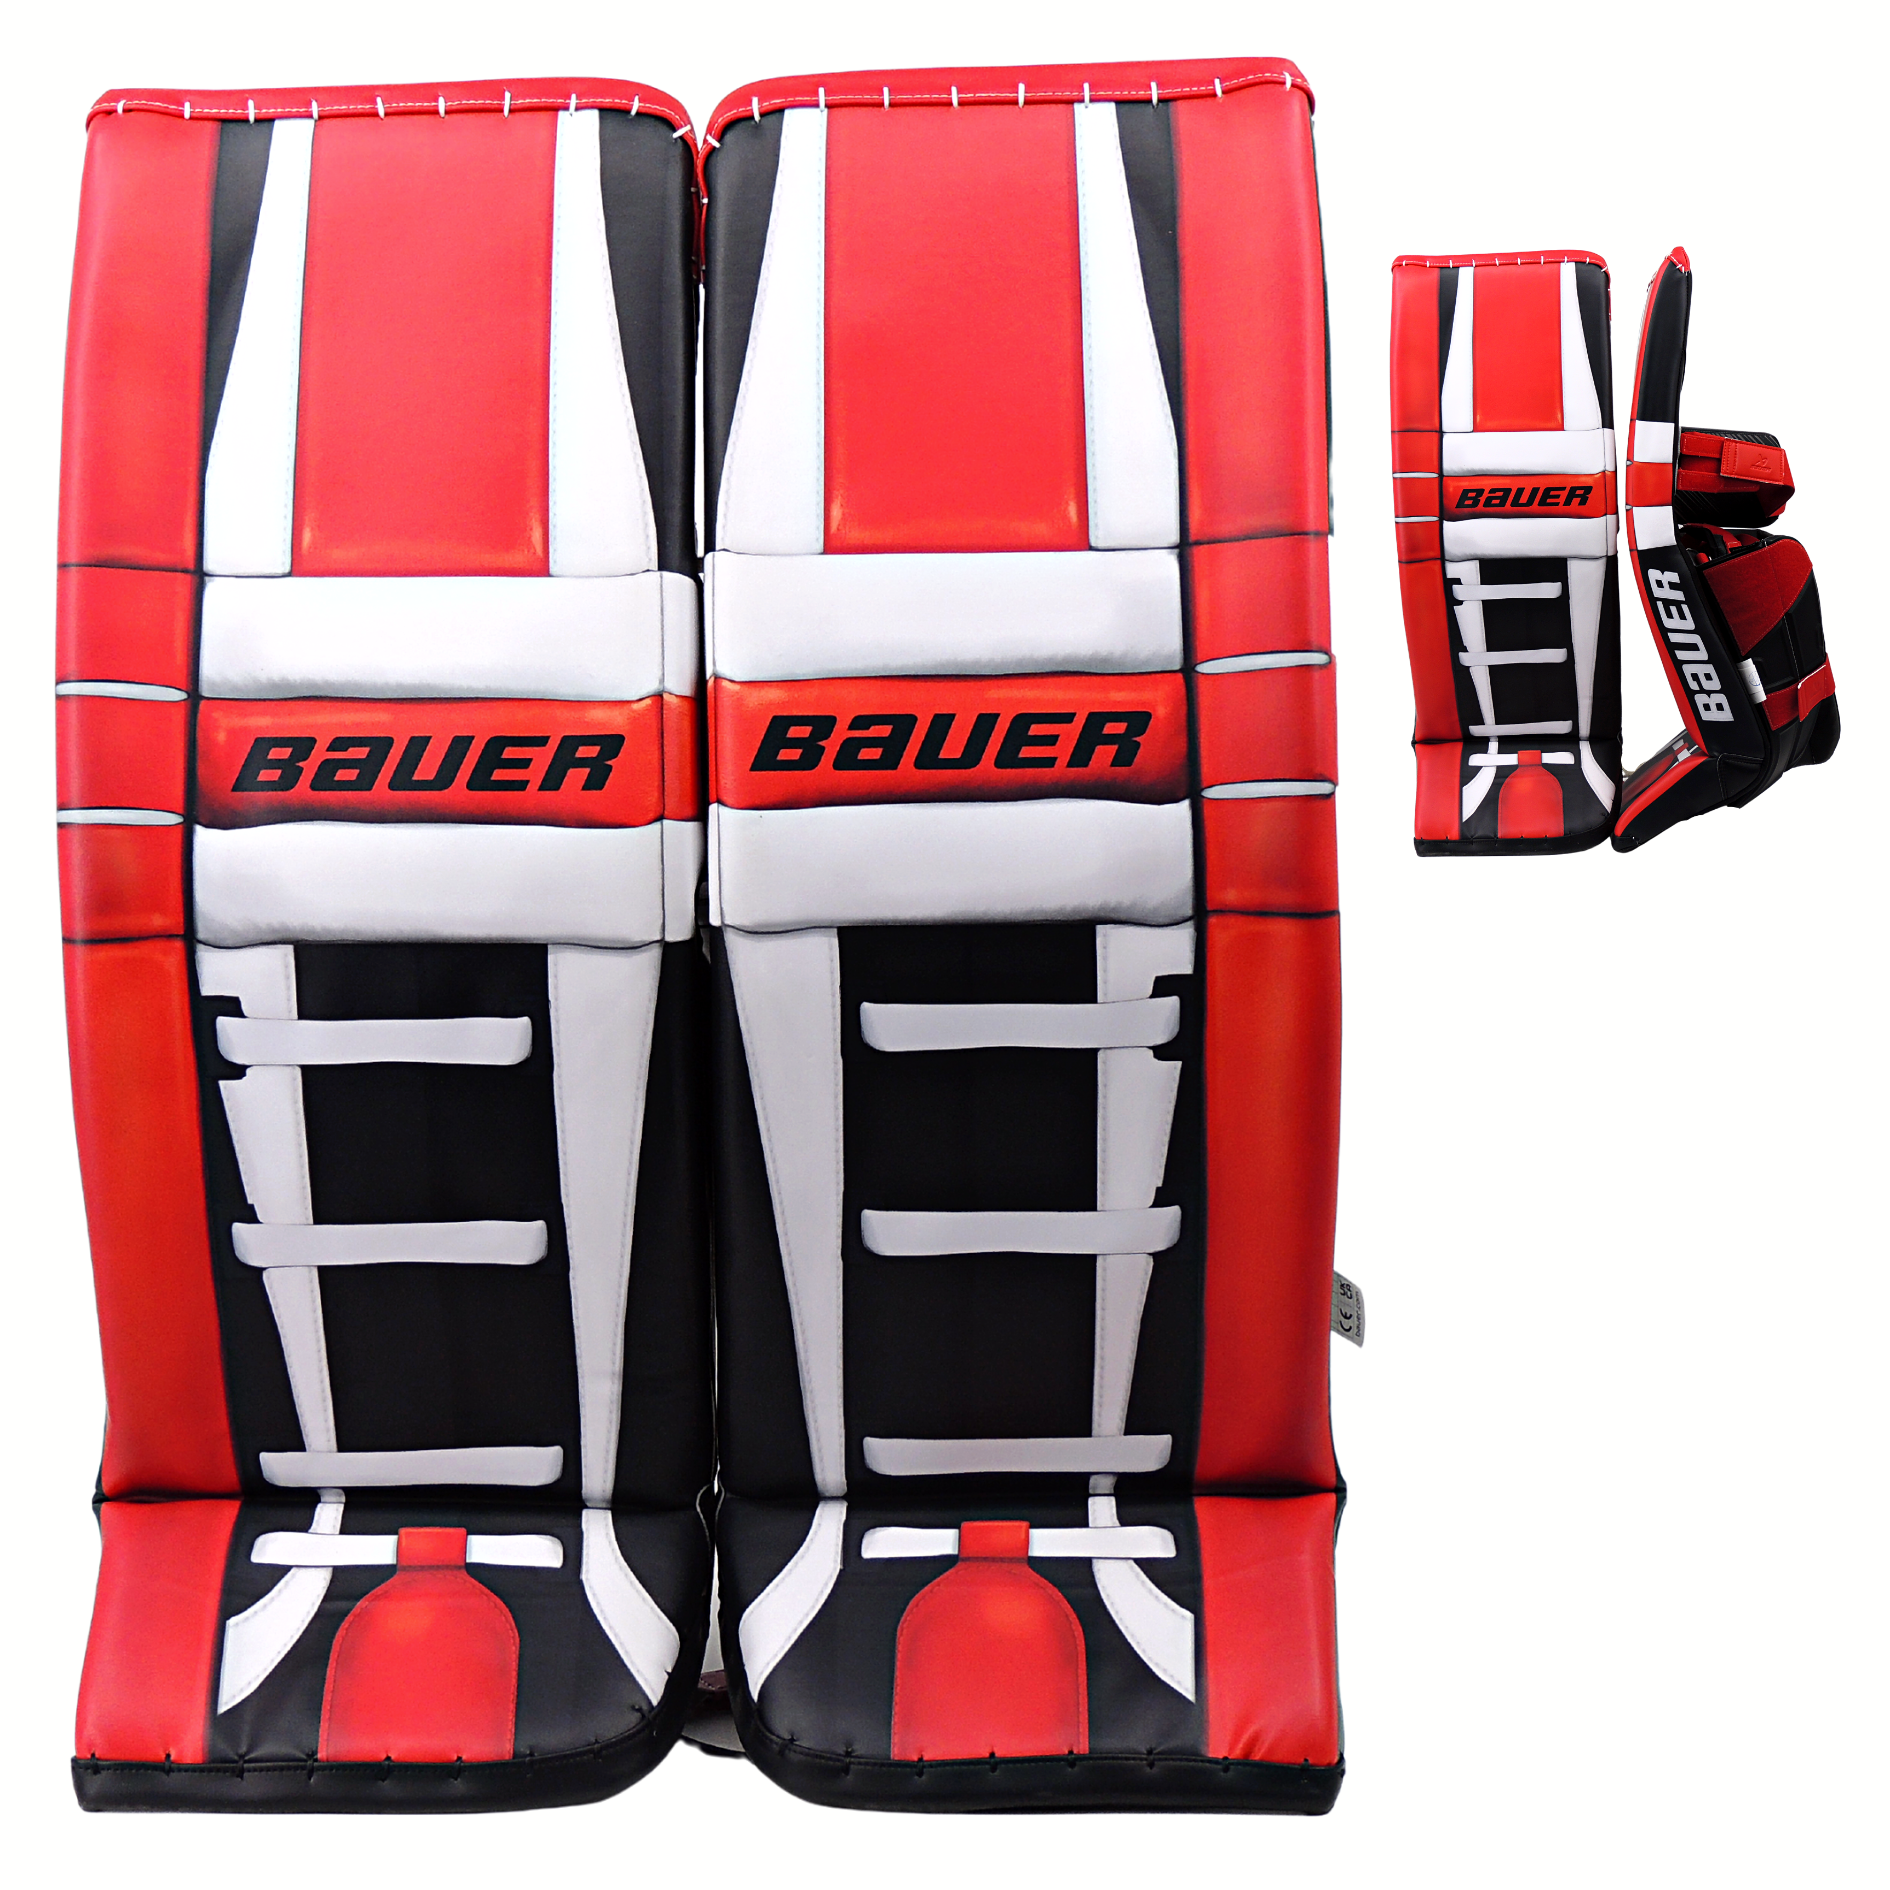 The Best Custom Goalie Pad Designs + Graphics of All Time